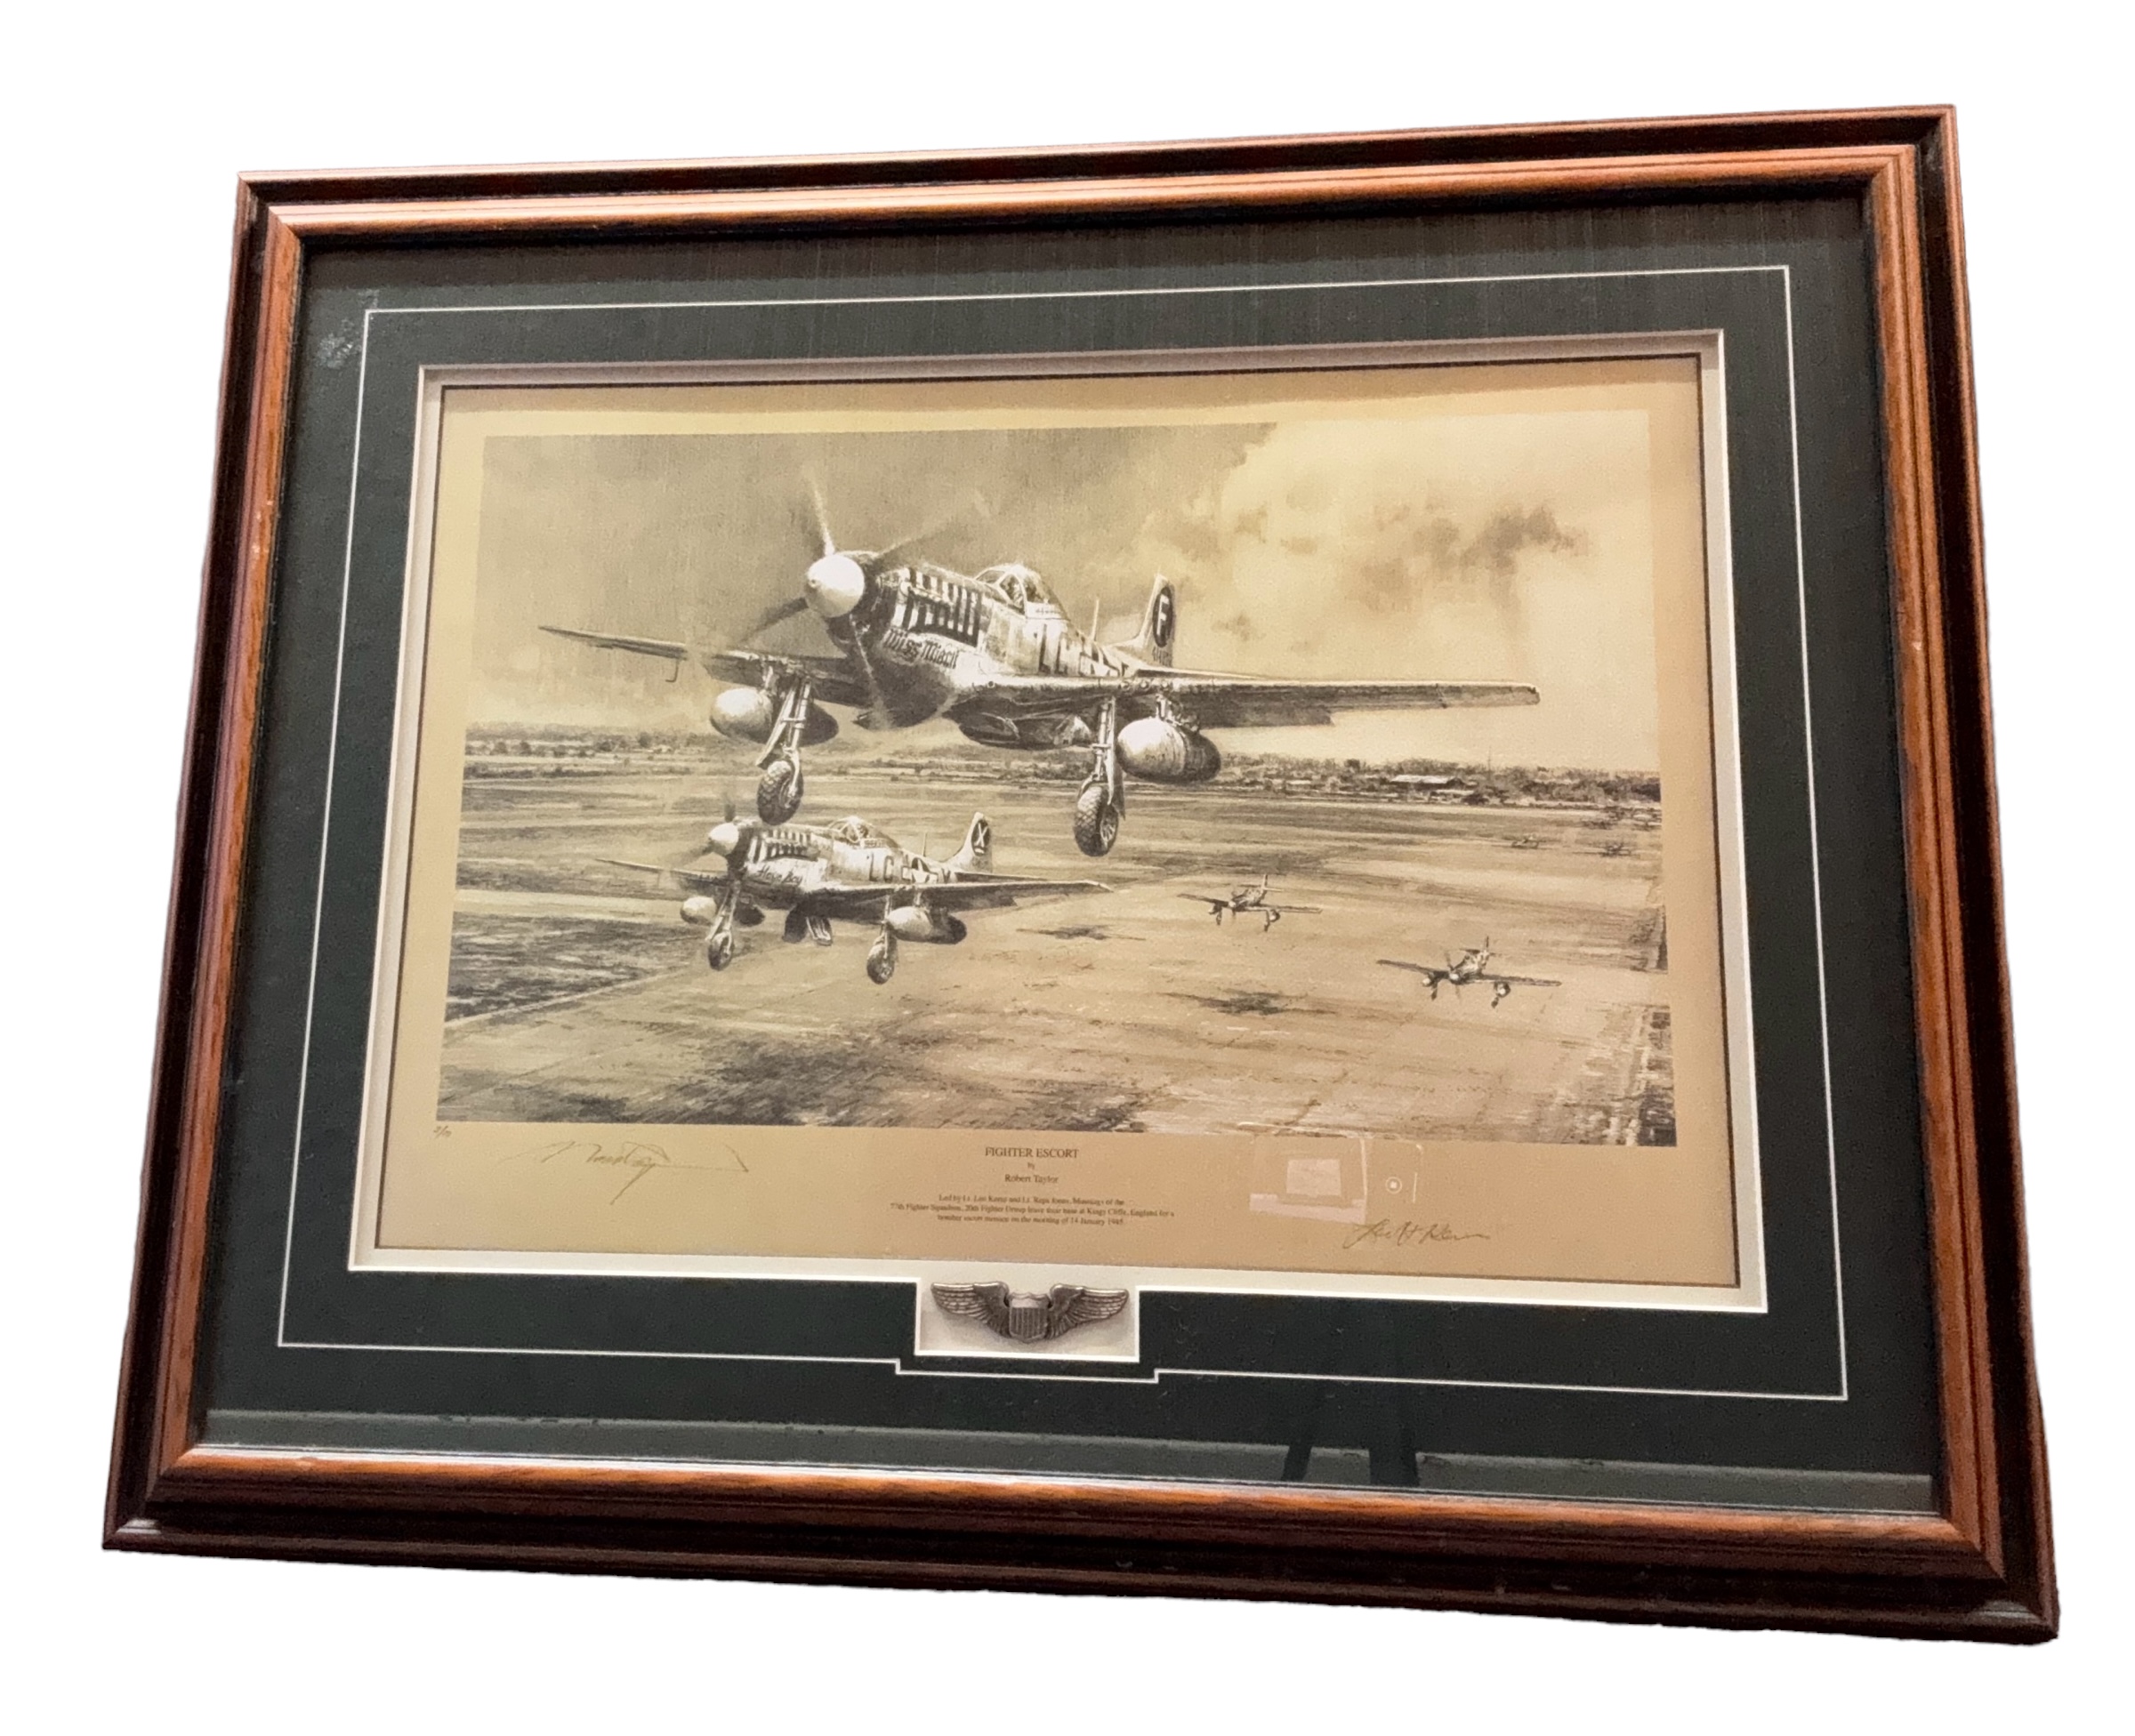 Fighter Escort WWII print 29x24 inch framed and mounted limited edition 3/10 signed in pencil by the - Image 3 of 3